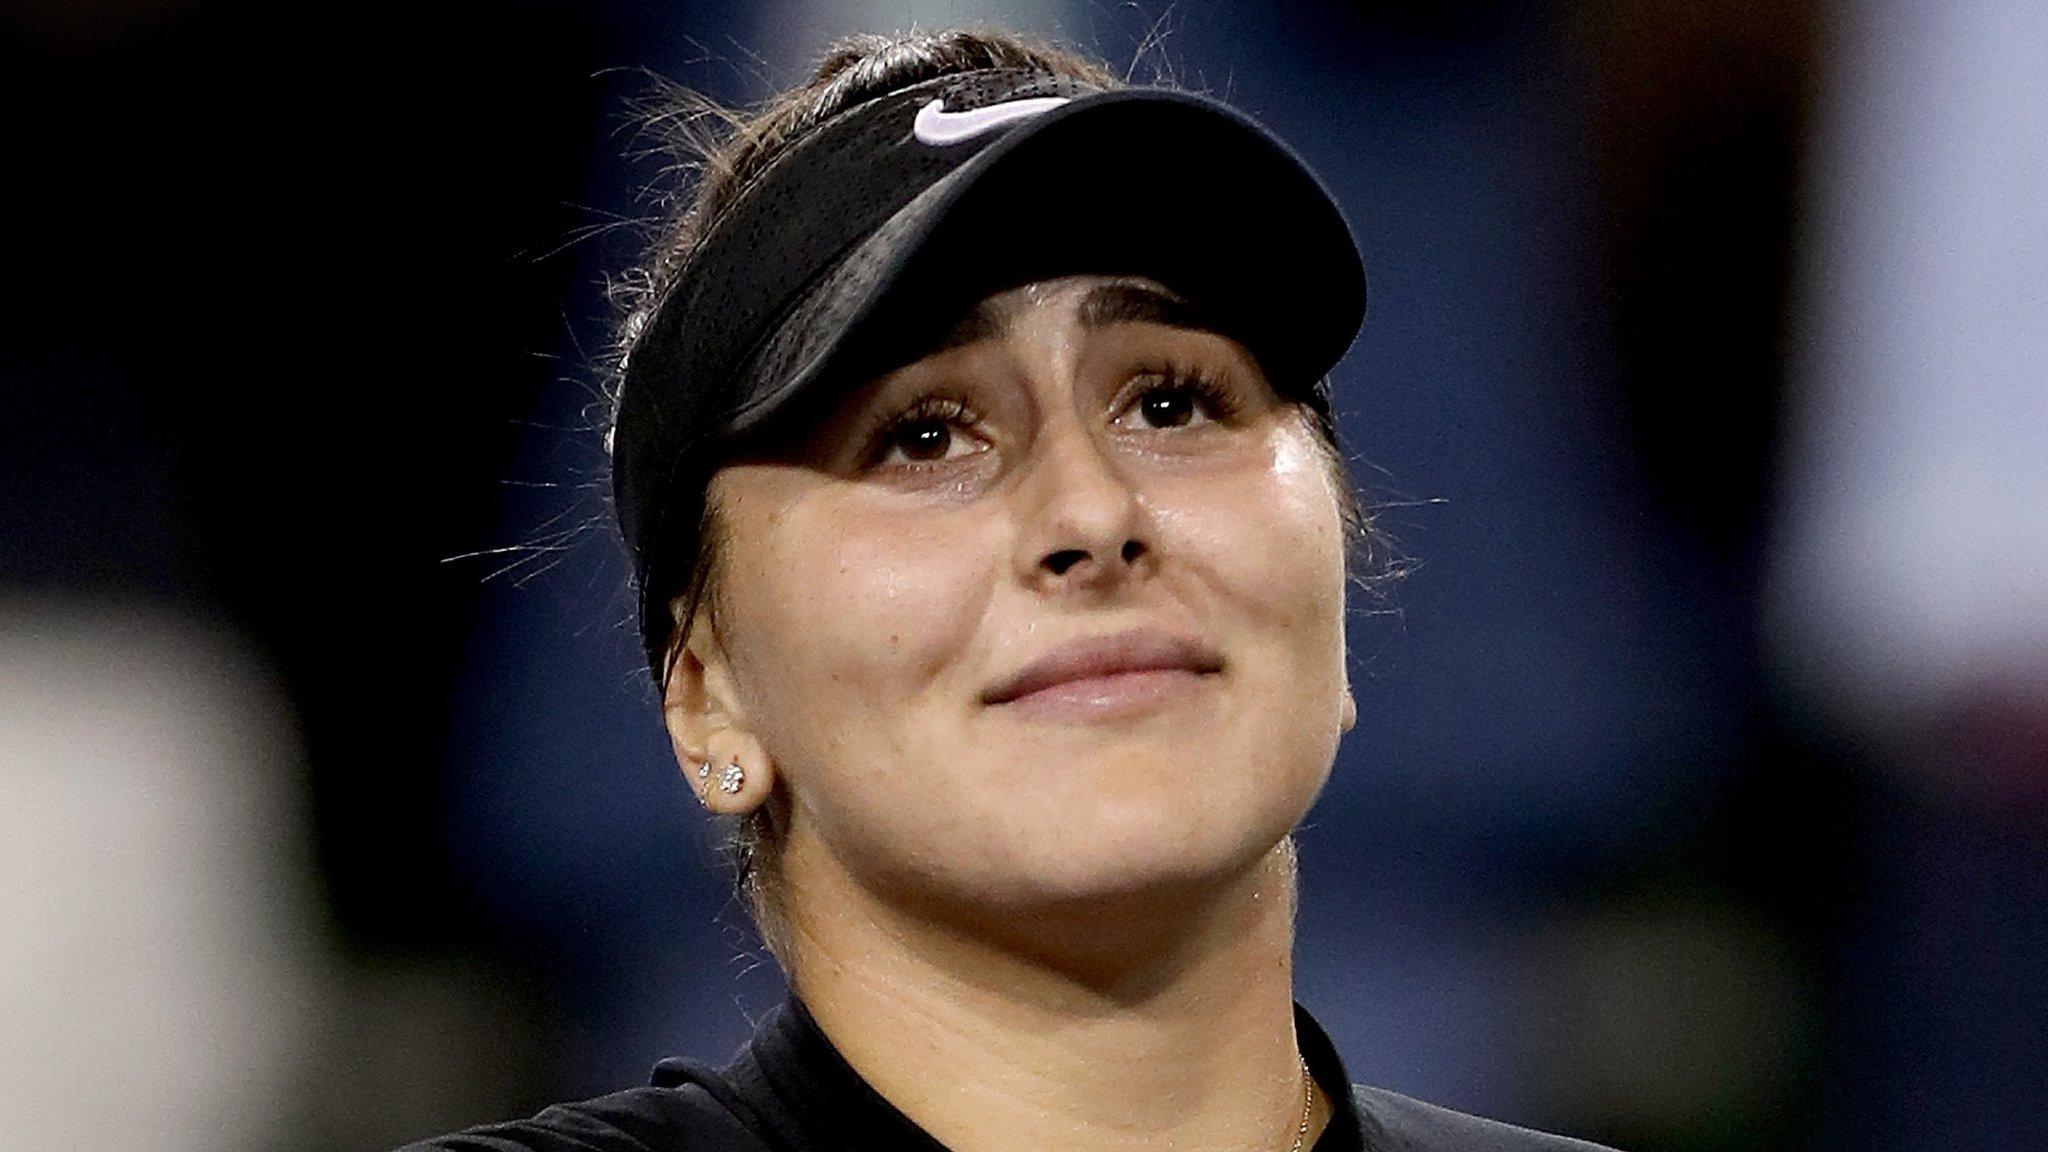 Indian Wells: Canadian teenager Bianca Andreescu is first wildcard